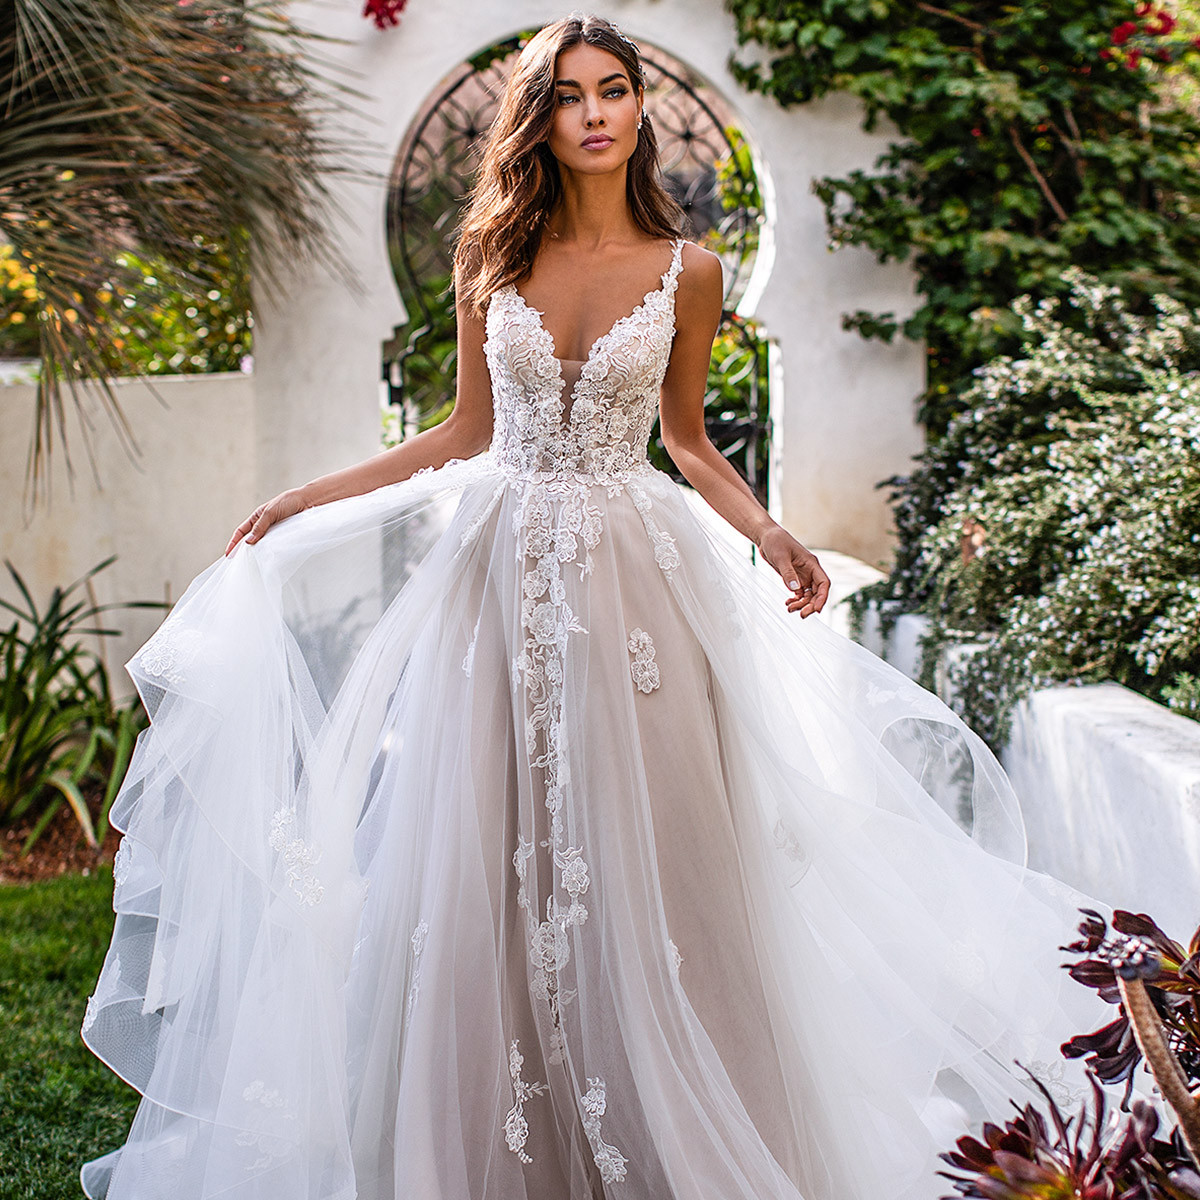 Popular Wedding Dresses
 Most Popular Wedding Dresses on Our Pinterest This Year